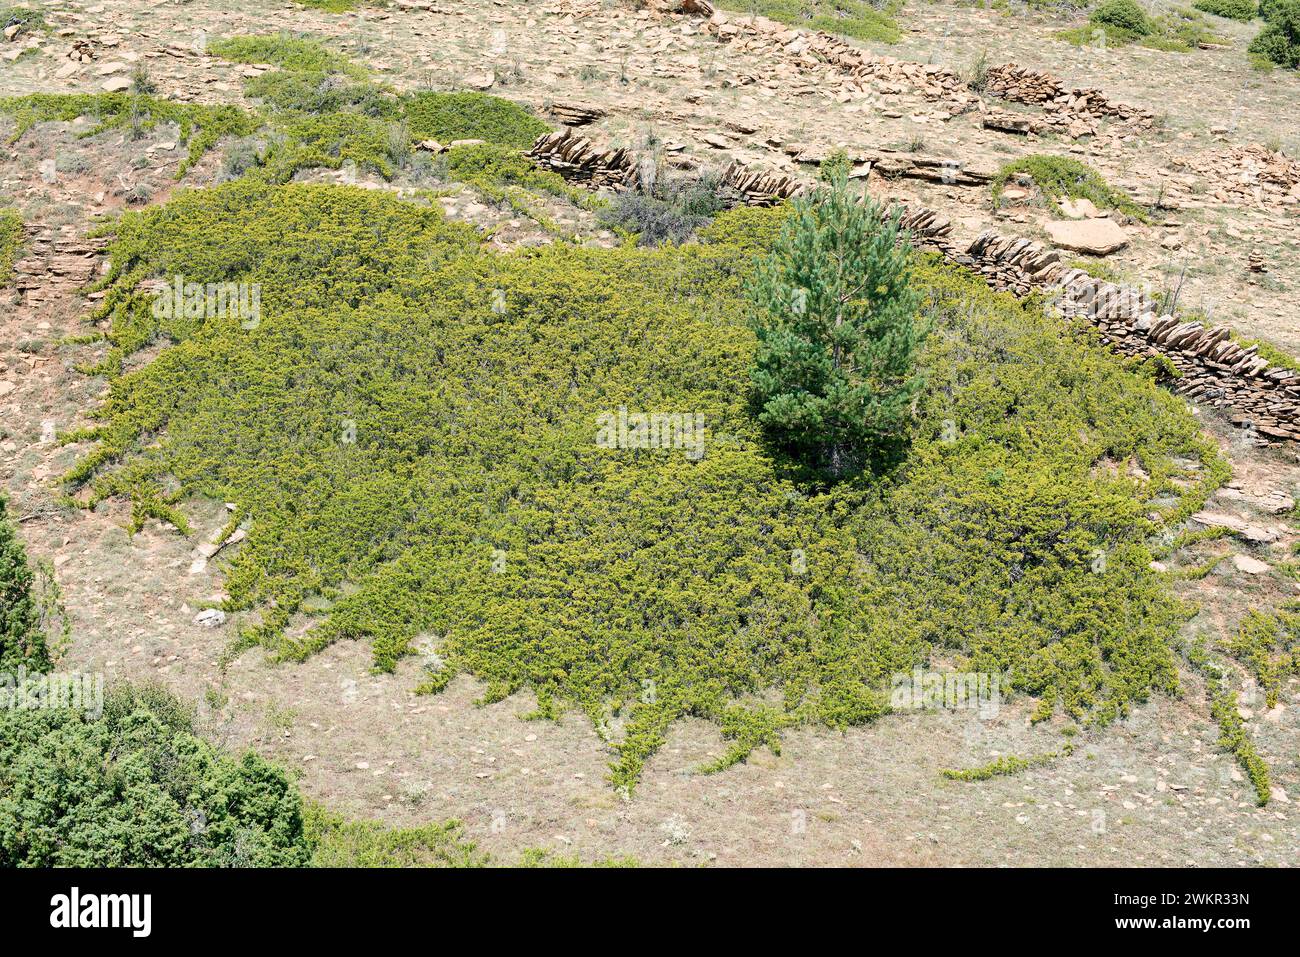 Savin juniper (Juniperus sabina) is a creeping poisonous shrub native to mountains of central and southern Europe, Turkey and Algeria. This photo was Stock Photo